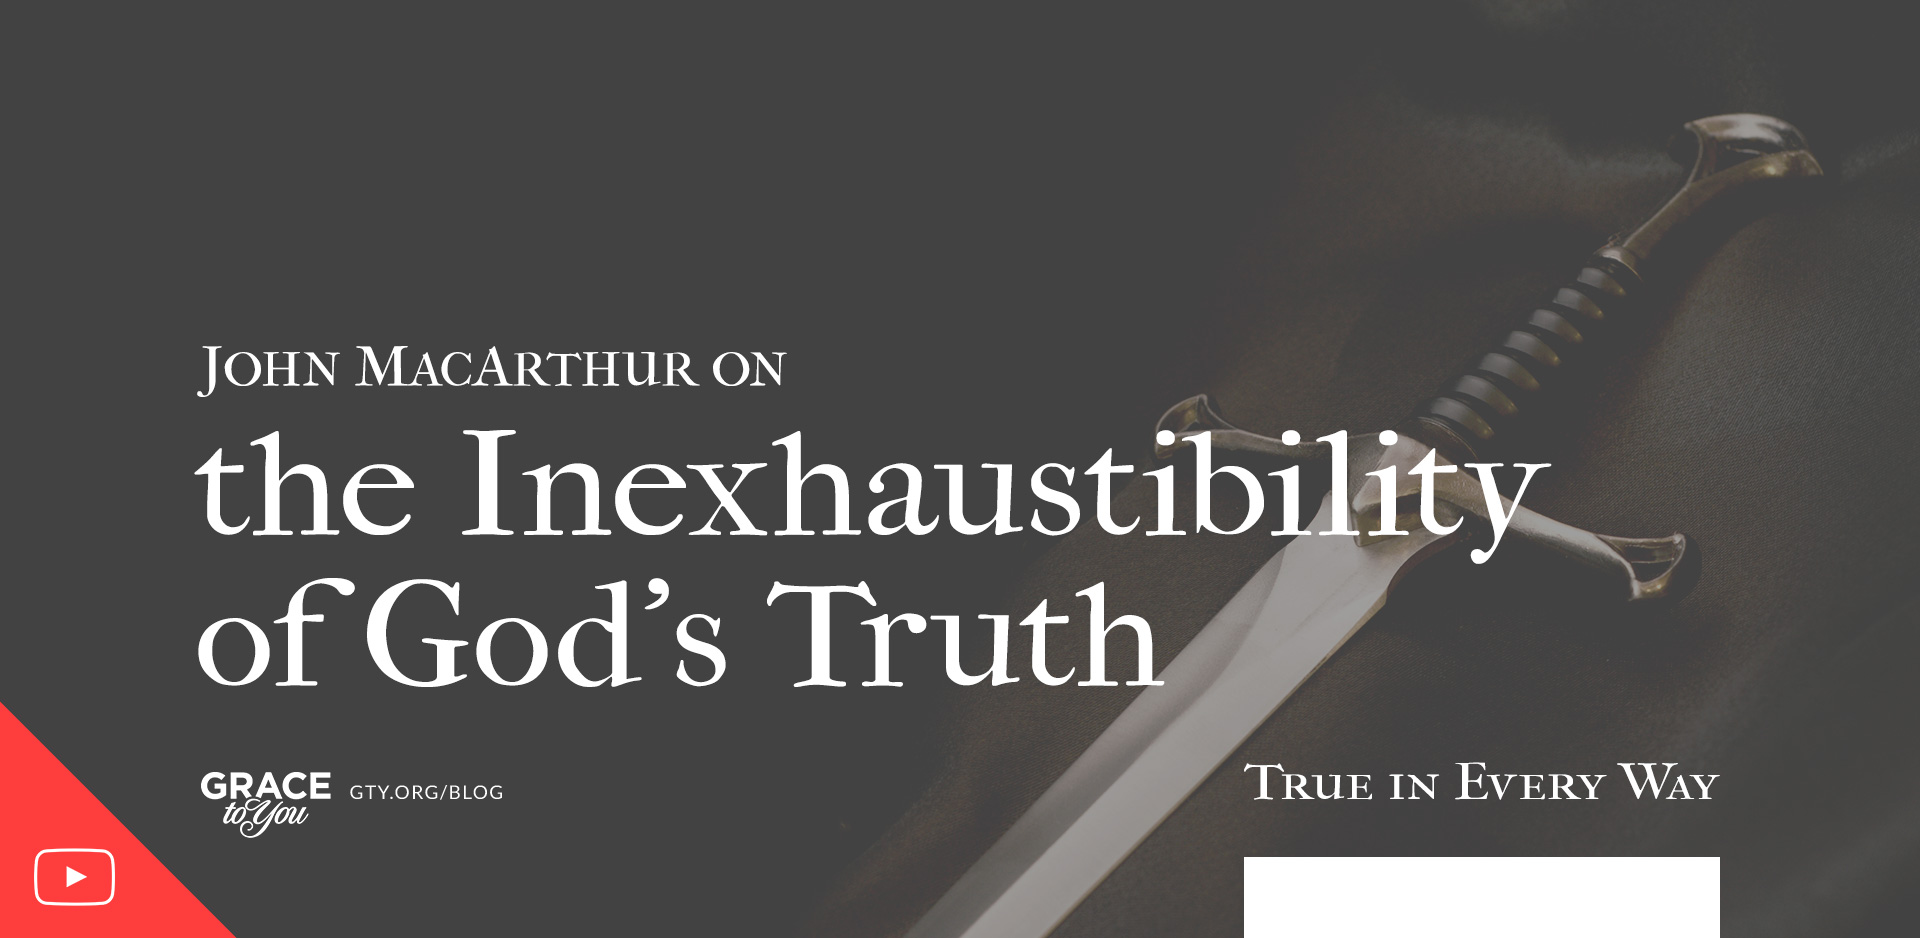 John MacArthur on the Inexhaustibility of God’s Truth